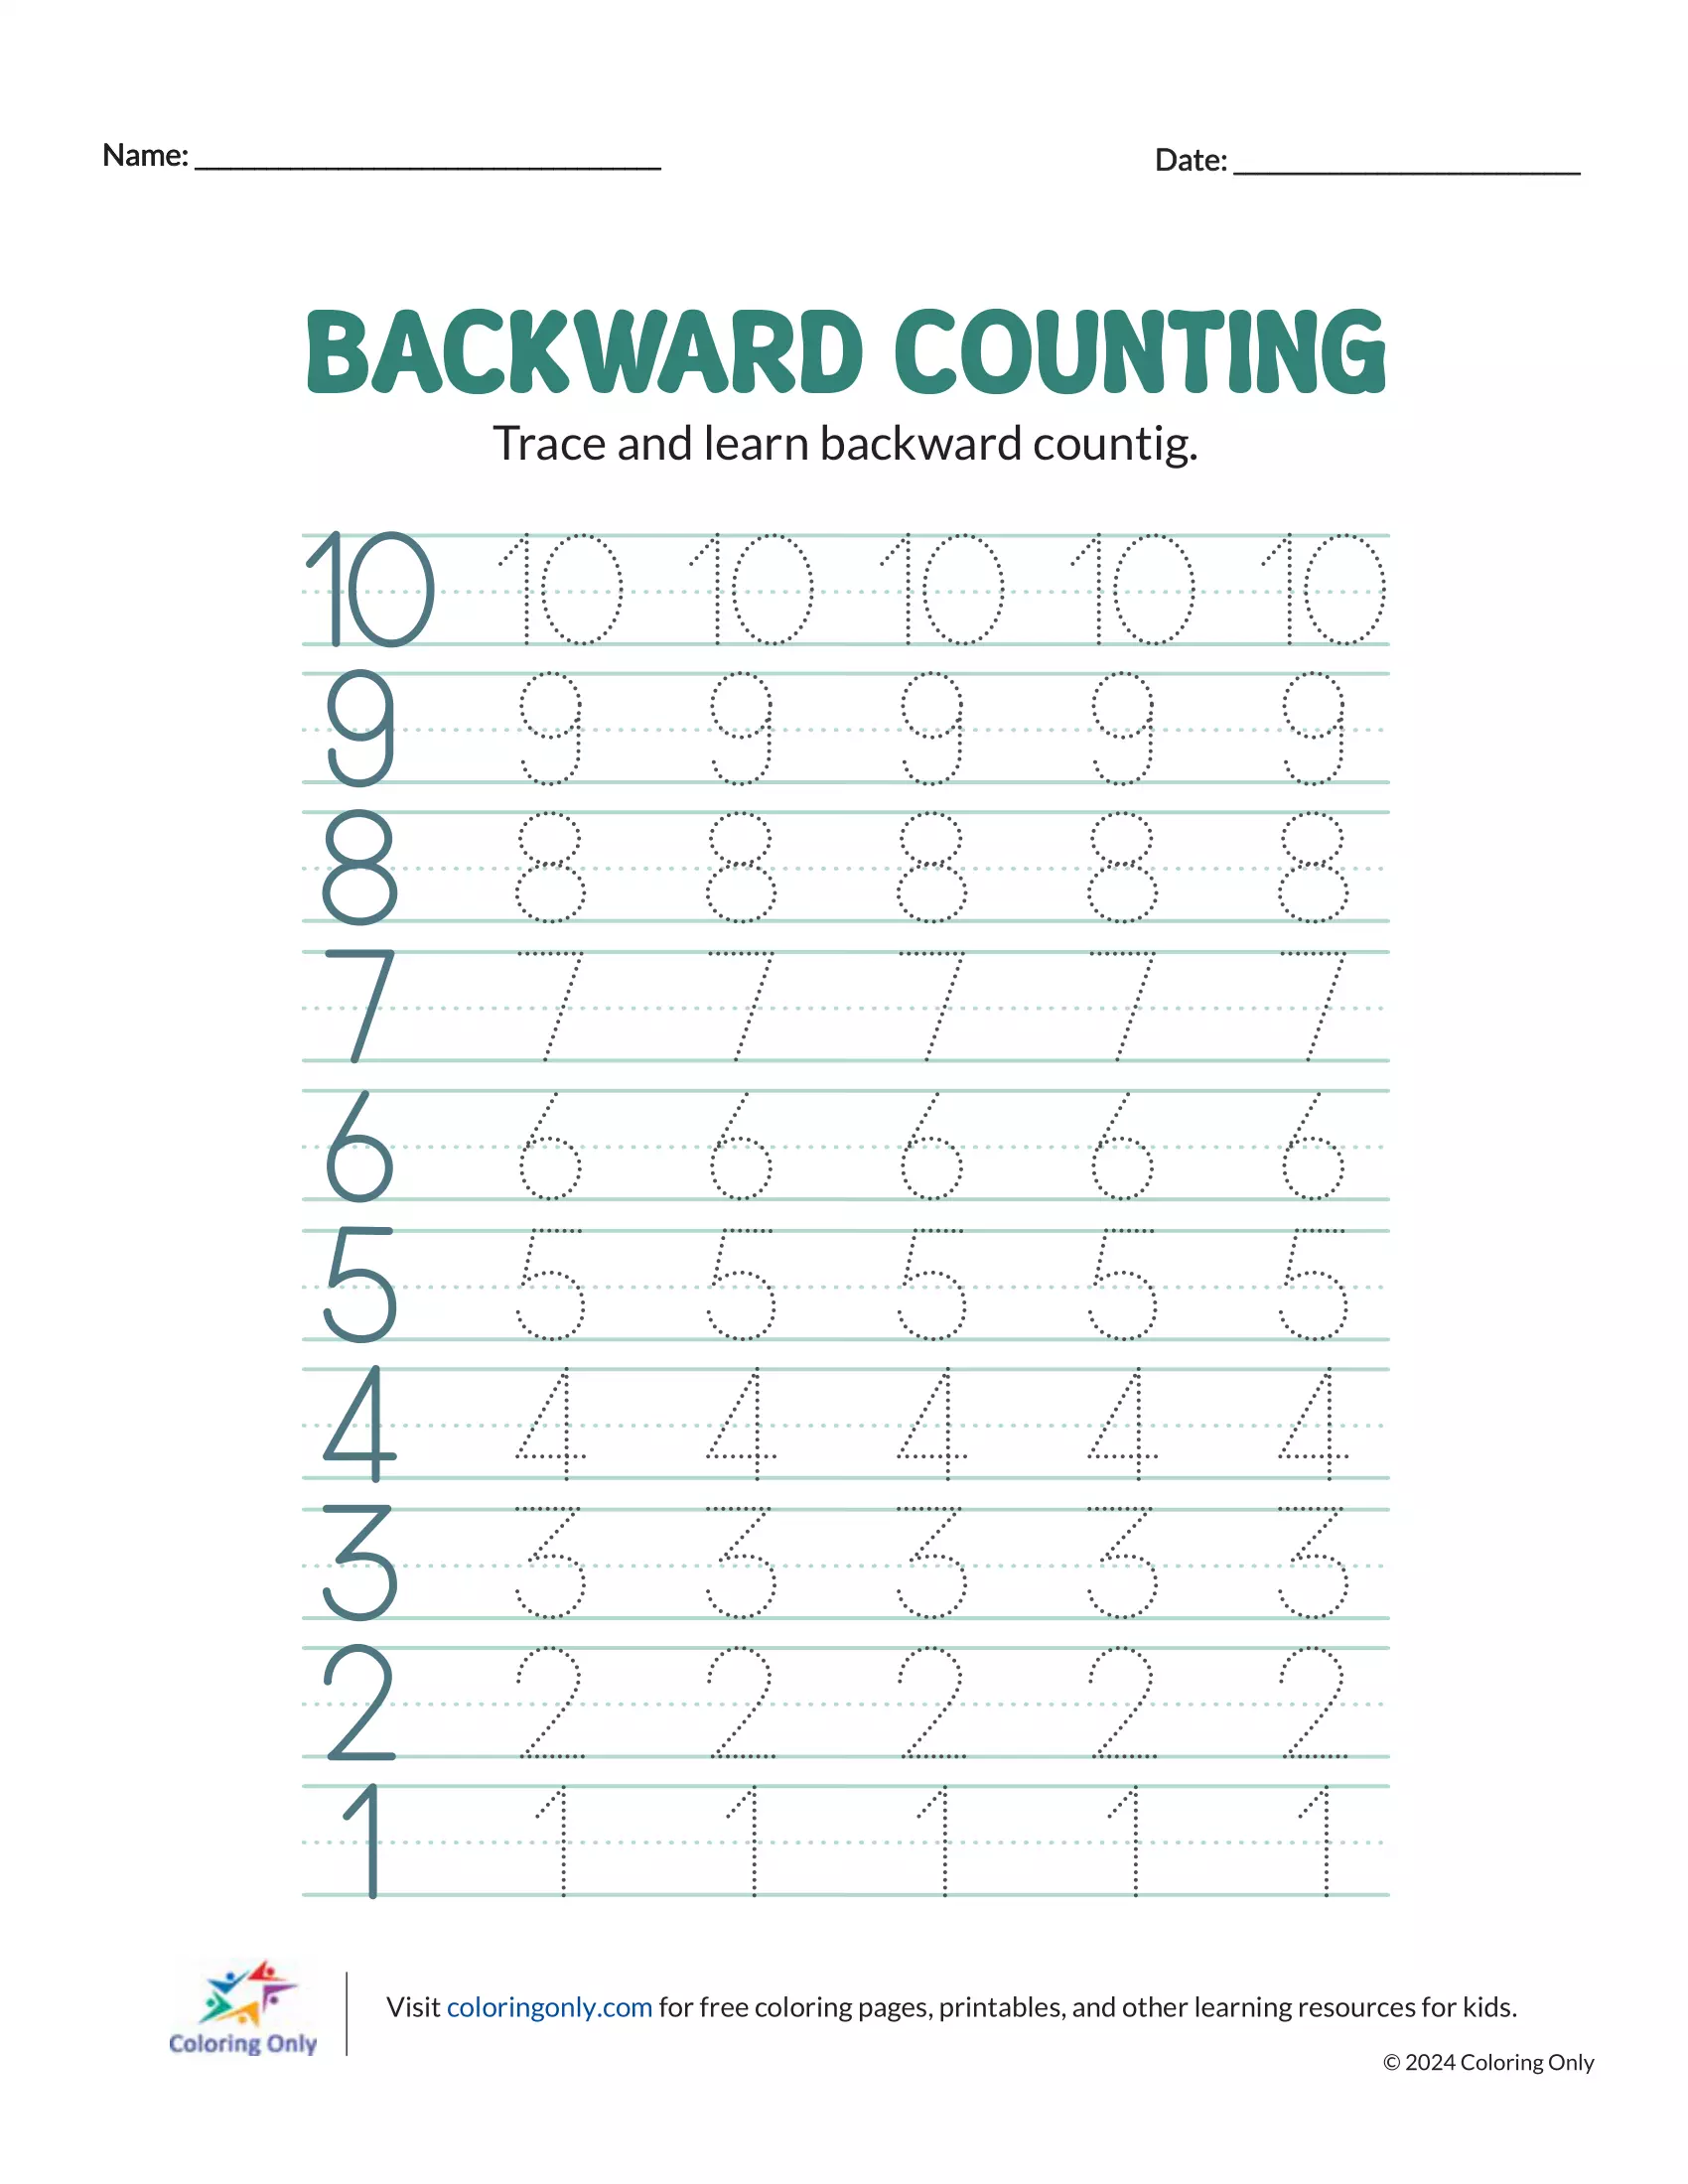 Learn counting with ease! This free printable worksheet helps kids master backward counting from 10 to 1 through engaging tracing activities.